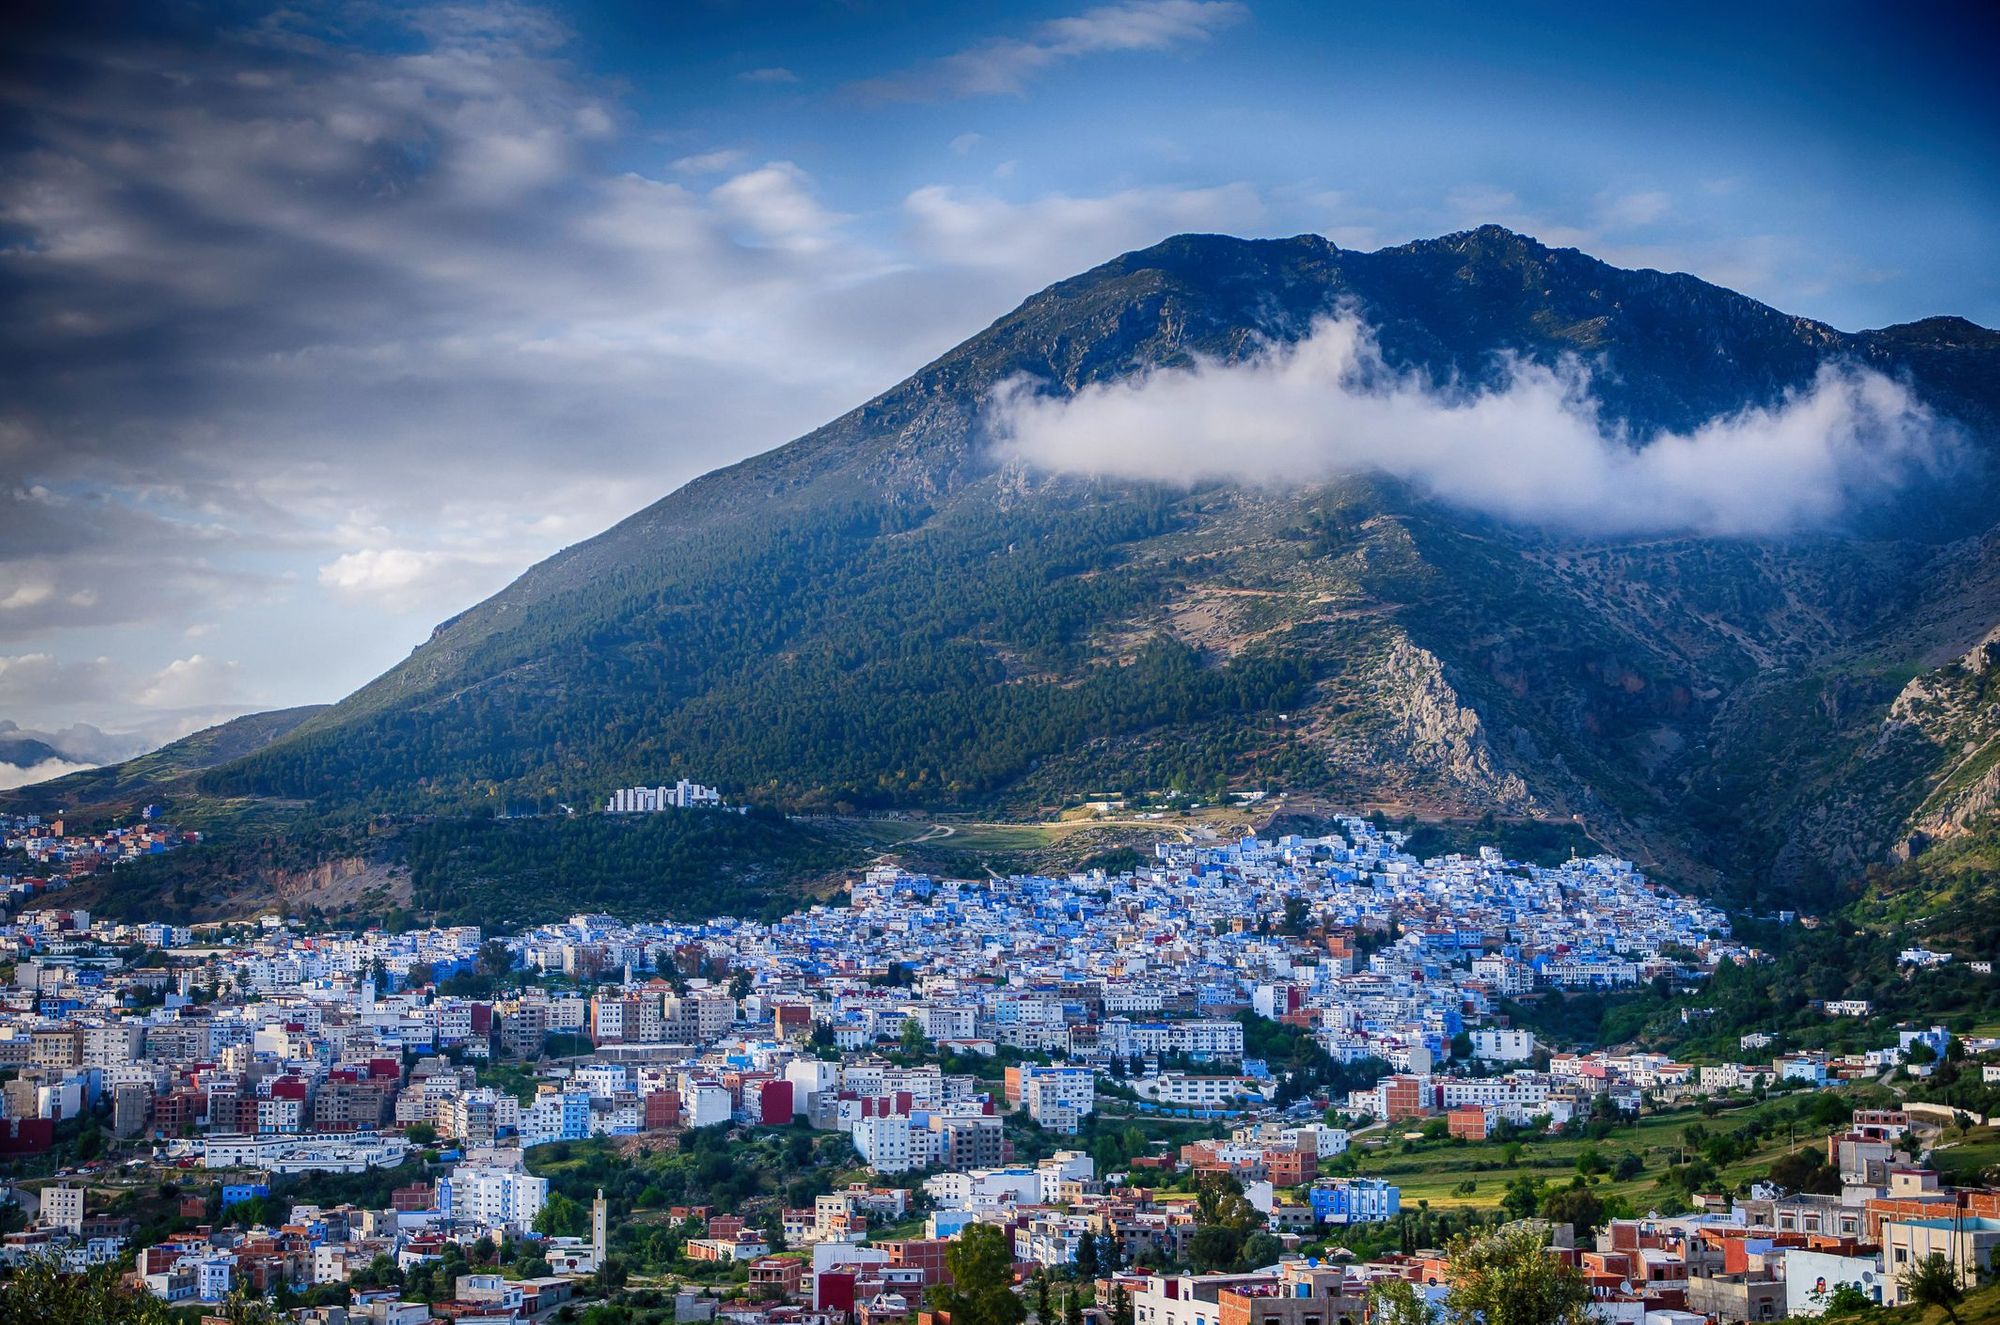 The blue houses of Chefchaouen in Morocco, with an imposing mountain behind them.